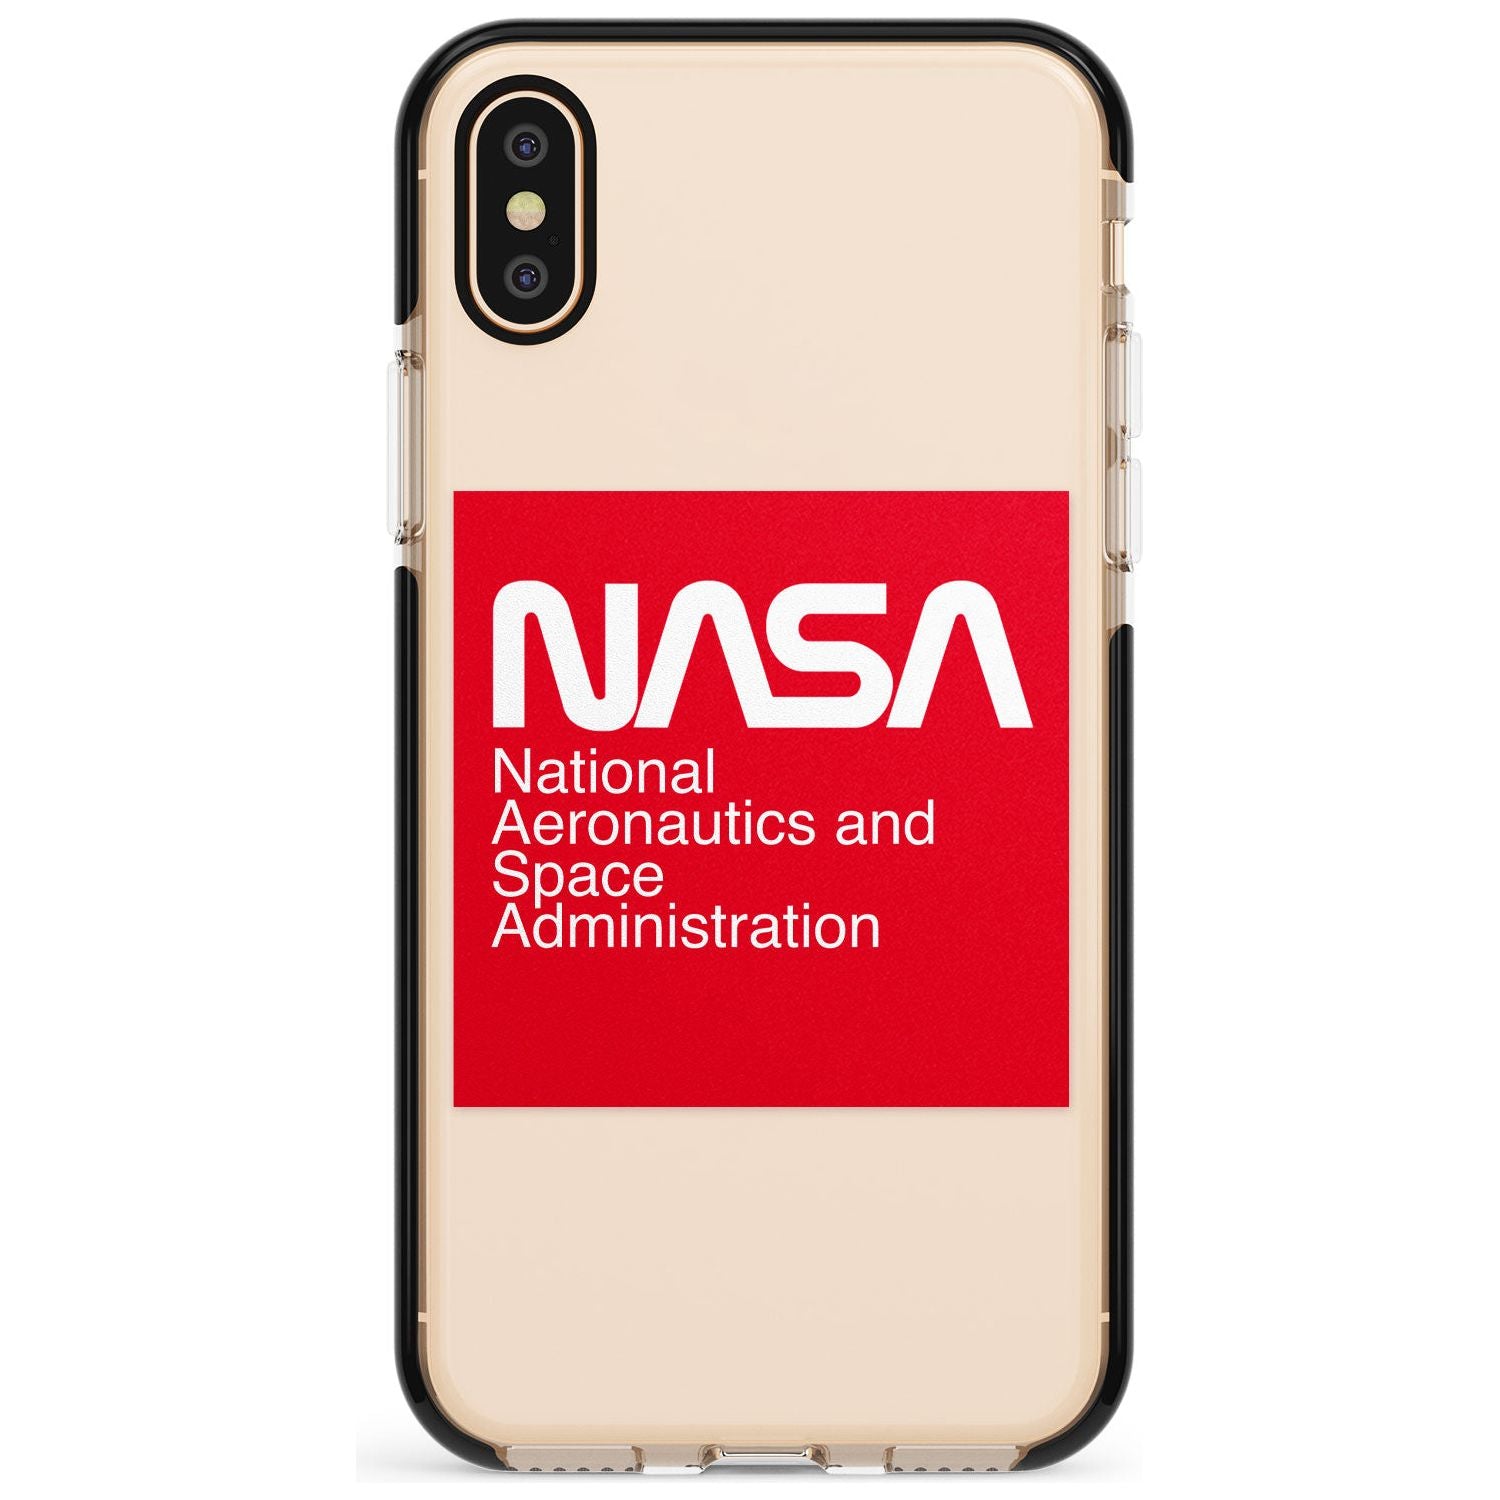 NASA The Worm Box Black Impact Phone Case for iPhone X XS Max XR